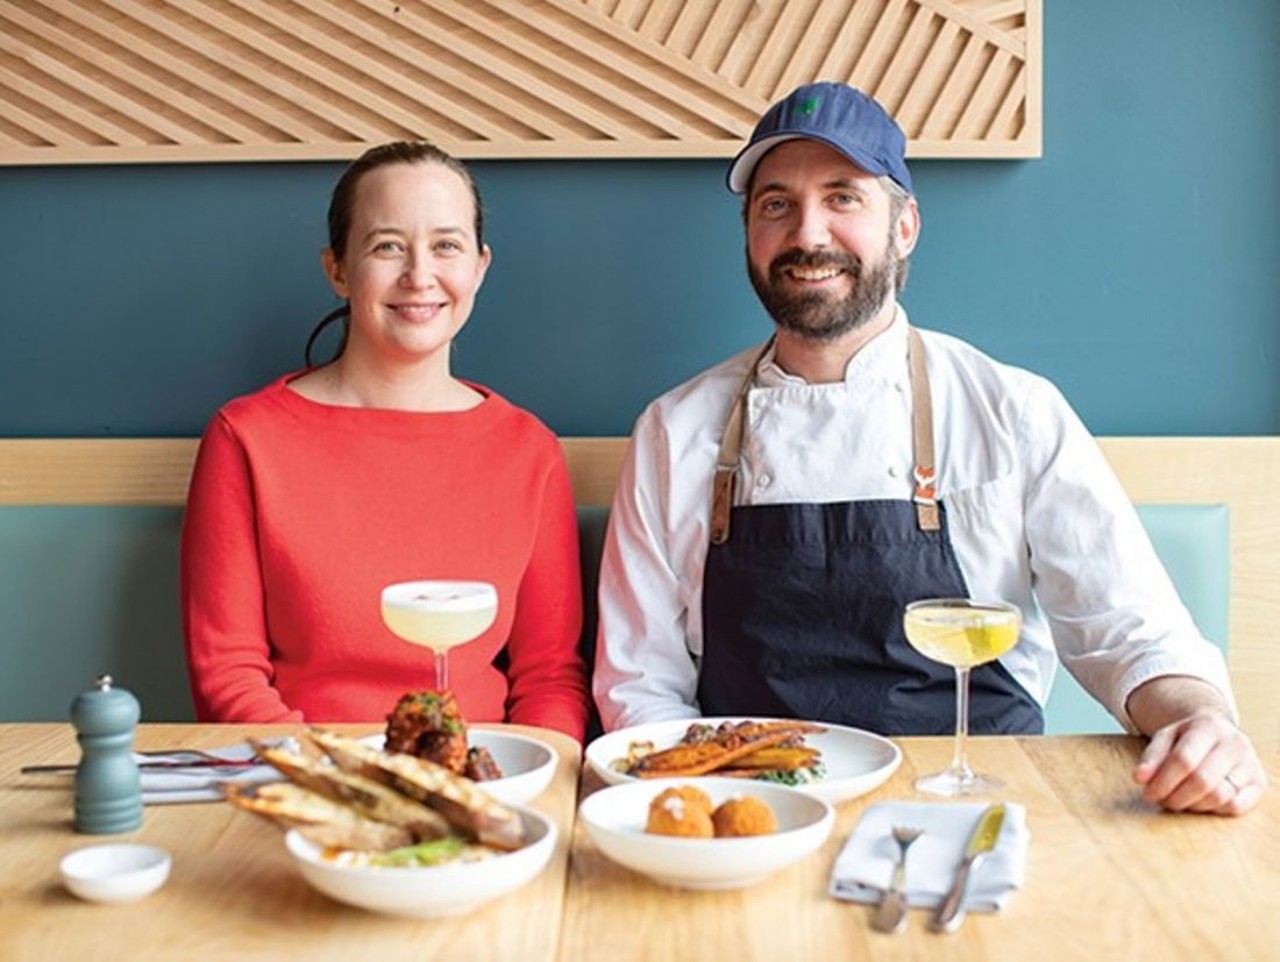 Best Restaurant Service: Little Fox
(2800 Shenandoah Avenue; 314-553-9456)
The New York Times agrees with us on this one. Cheryl Baehr provides further elaboration on just why this is one of America's favorite restaurants here.
Photo credit: Mabel Suen